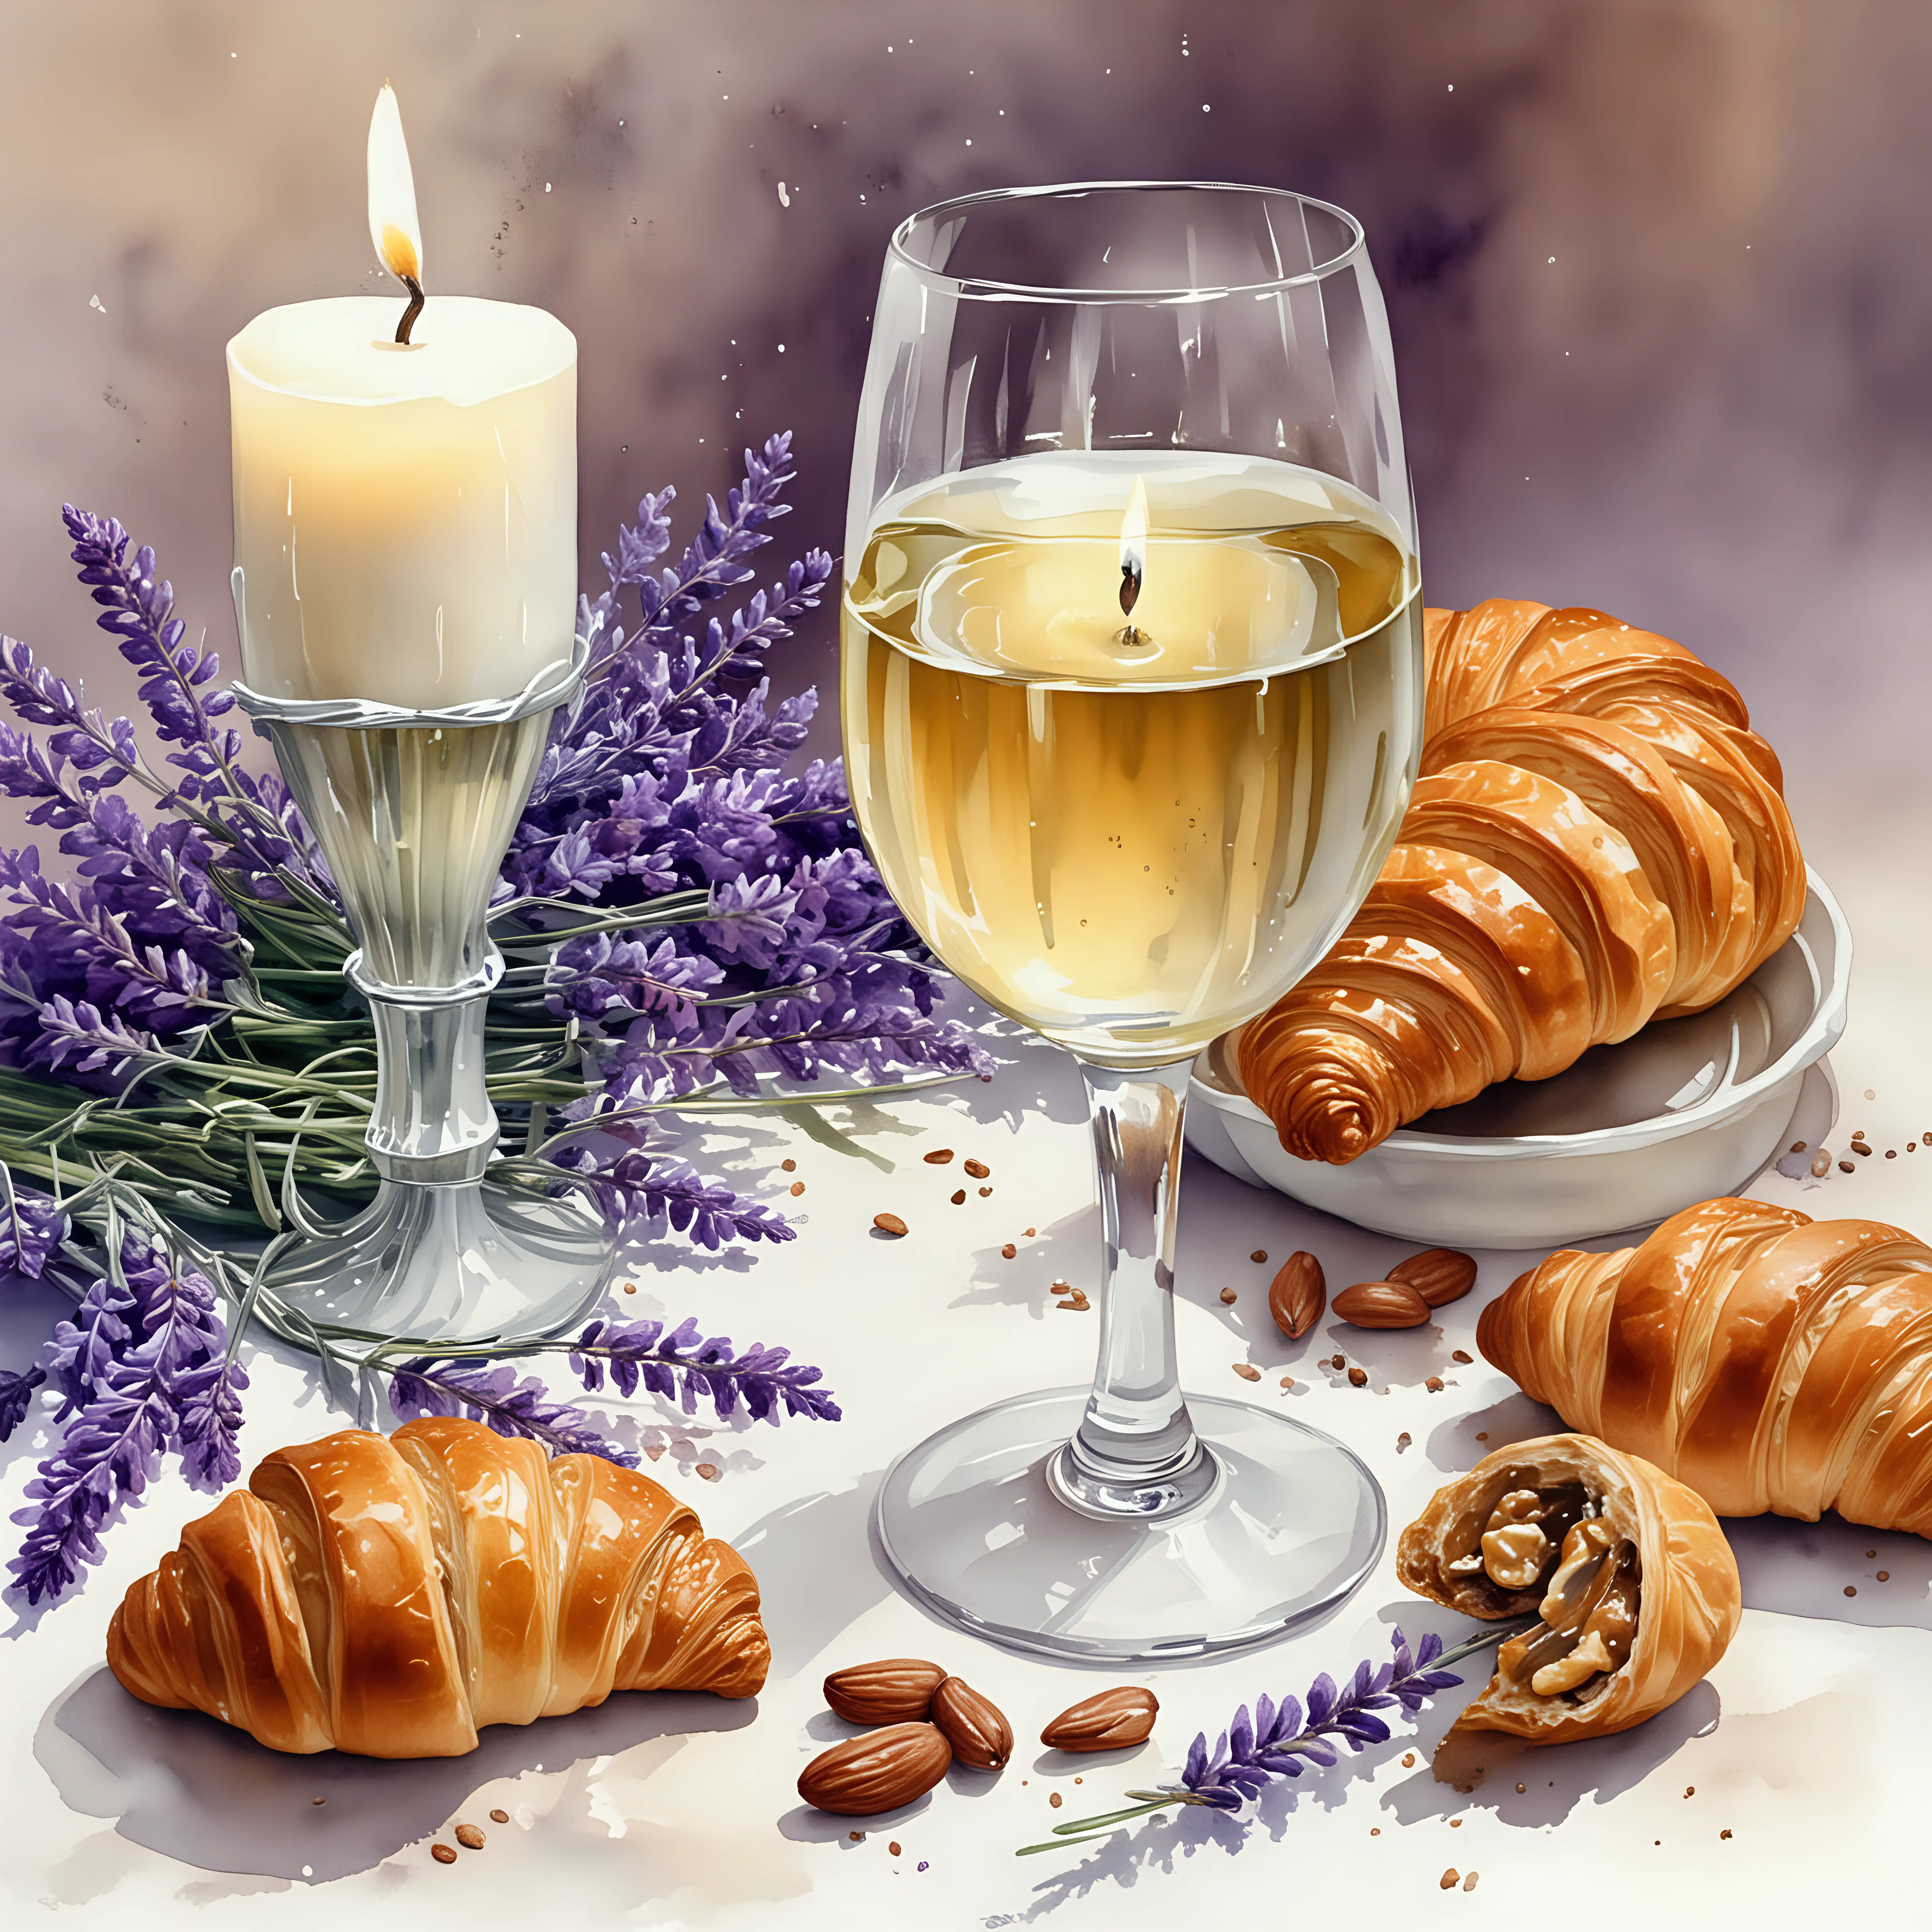 image drawn in watercolor: a glass of white wine, and 12 nuts near the glass , a bouquet of lavender nearby and croissants around, candle wax and spiderweb in the corner